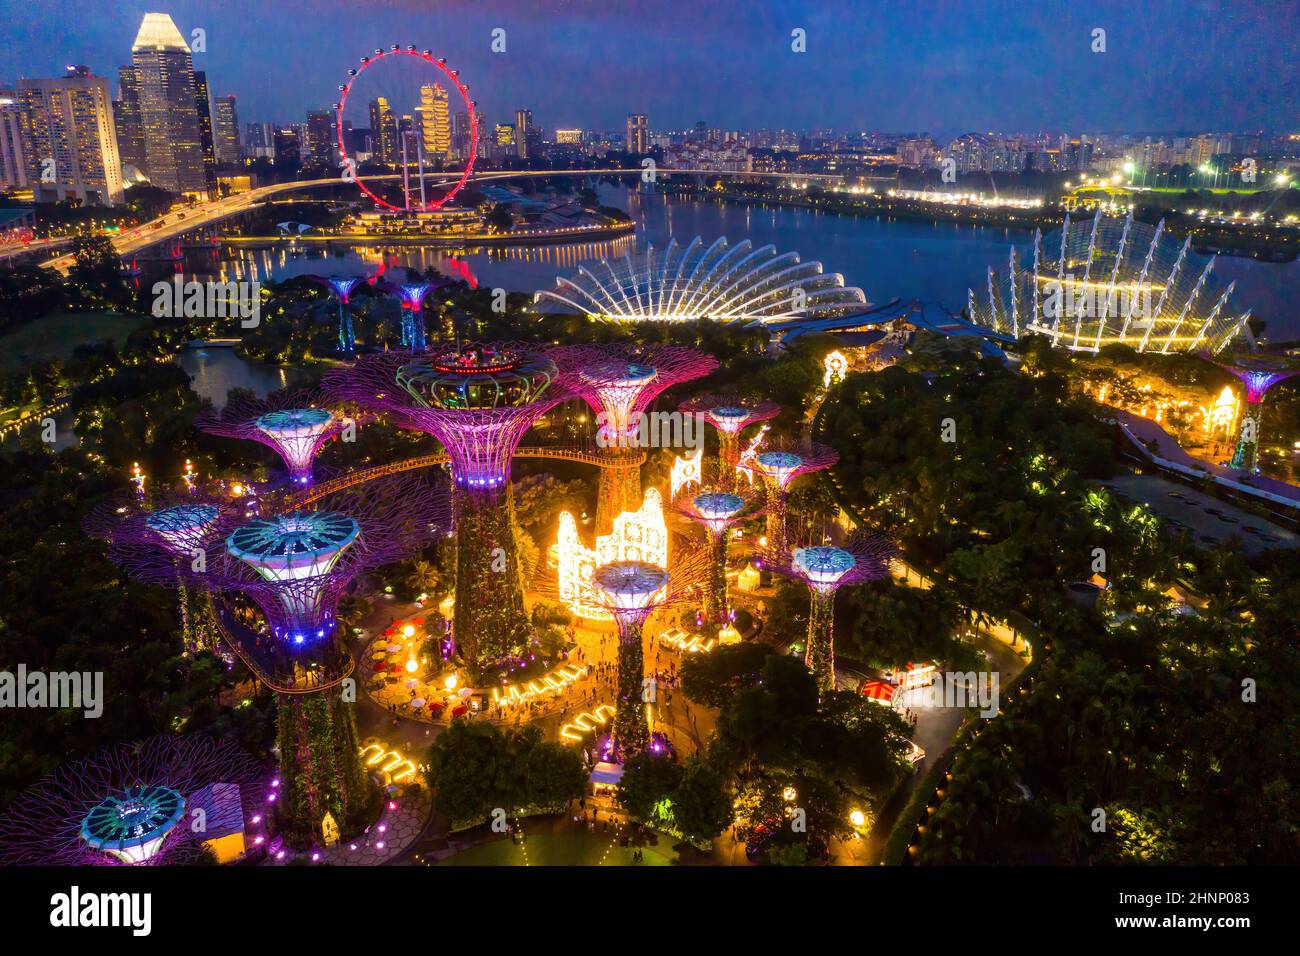 Gardens by the Bay, Singapour Banque D'Images